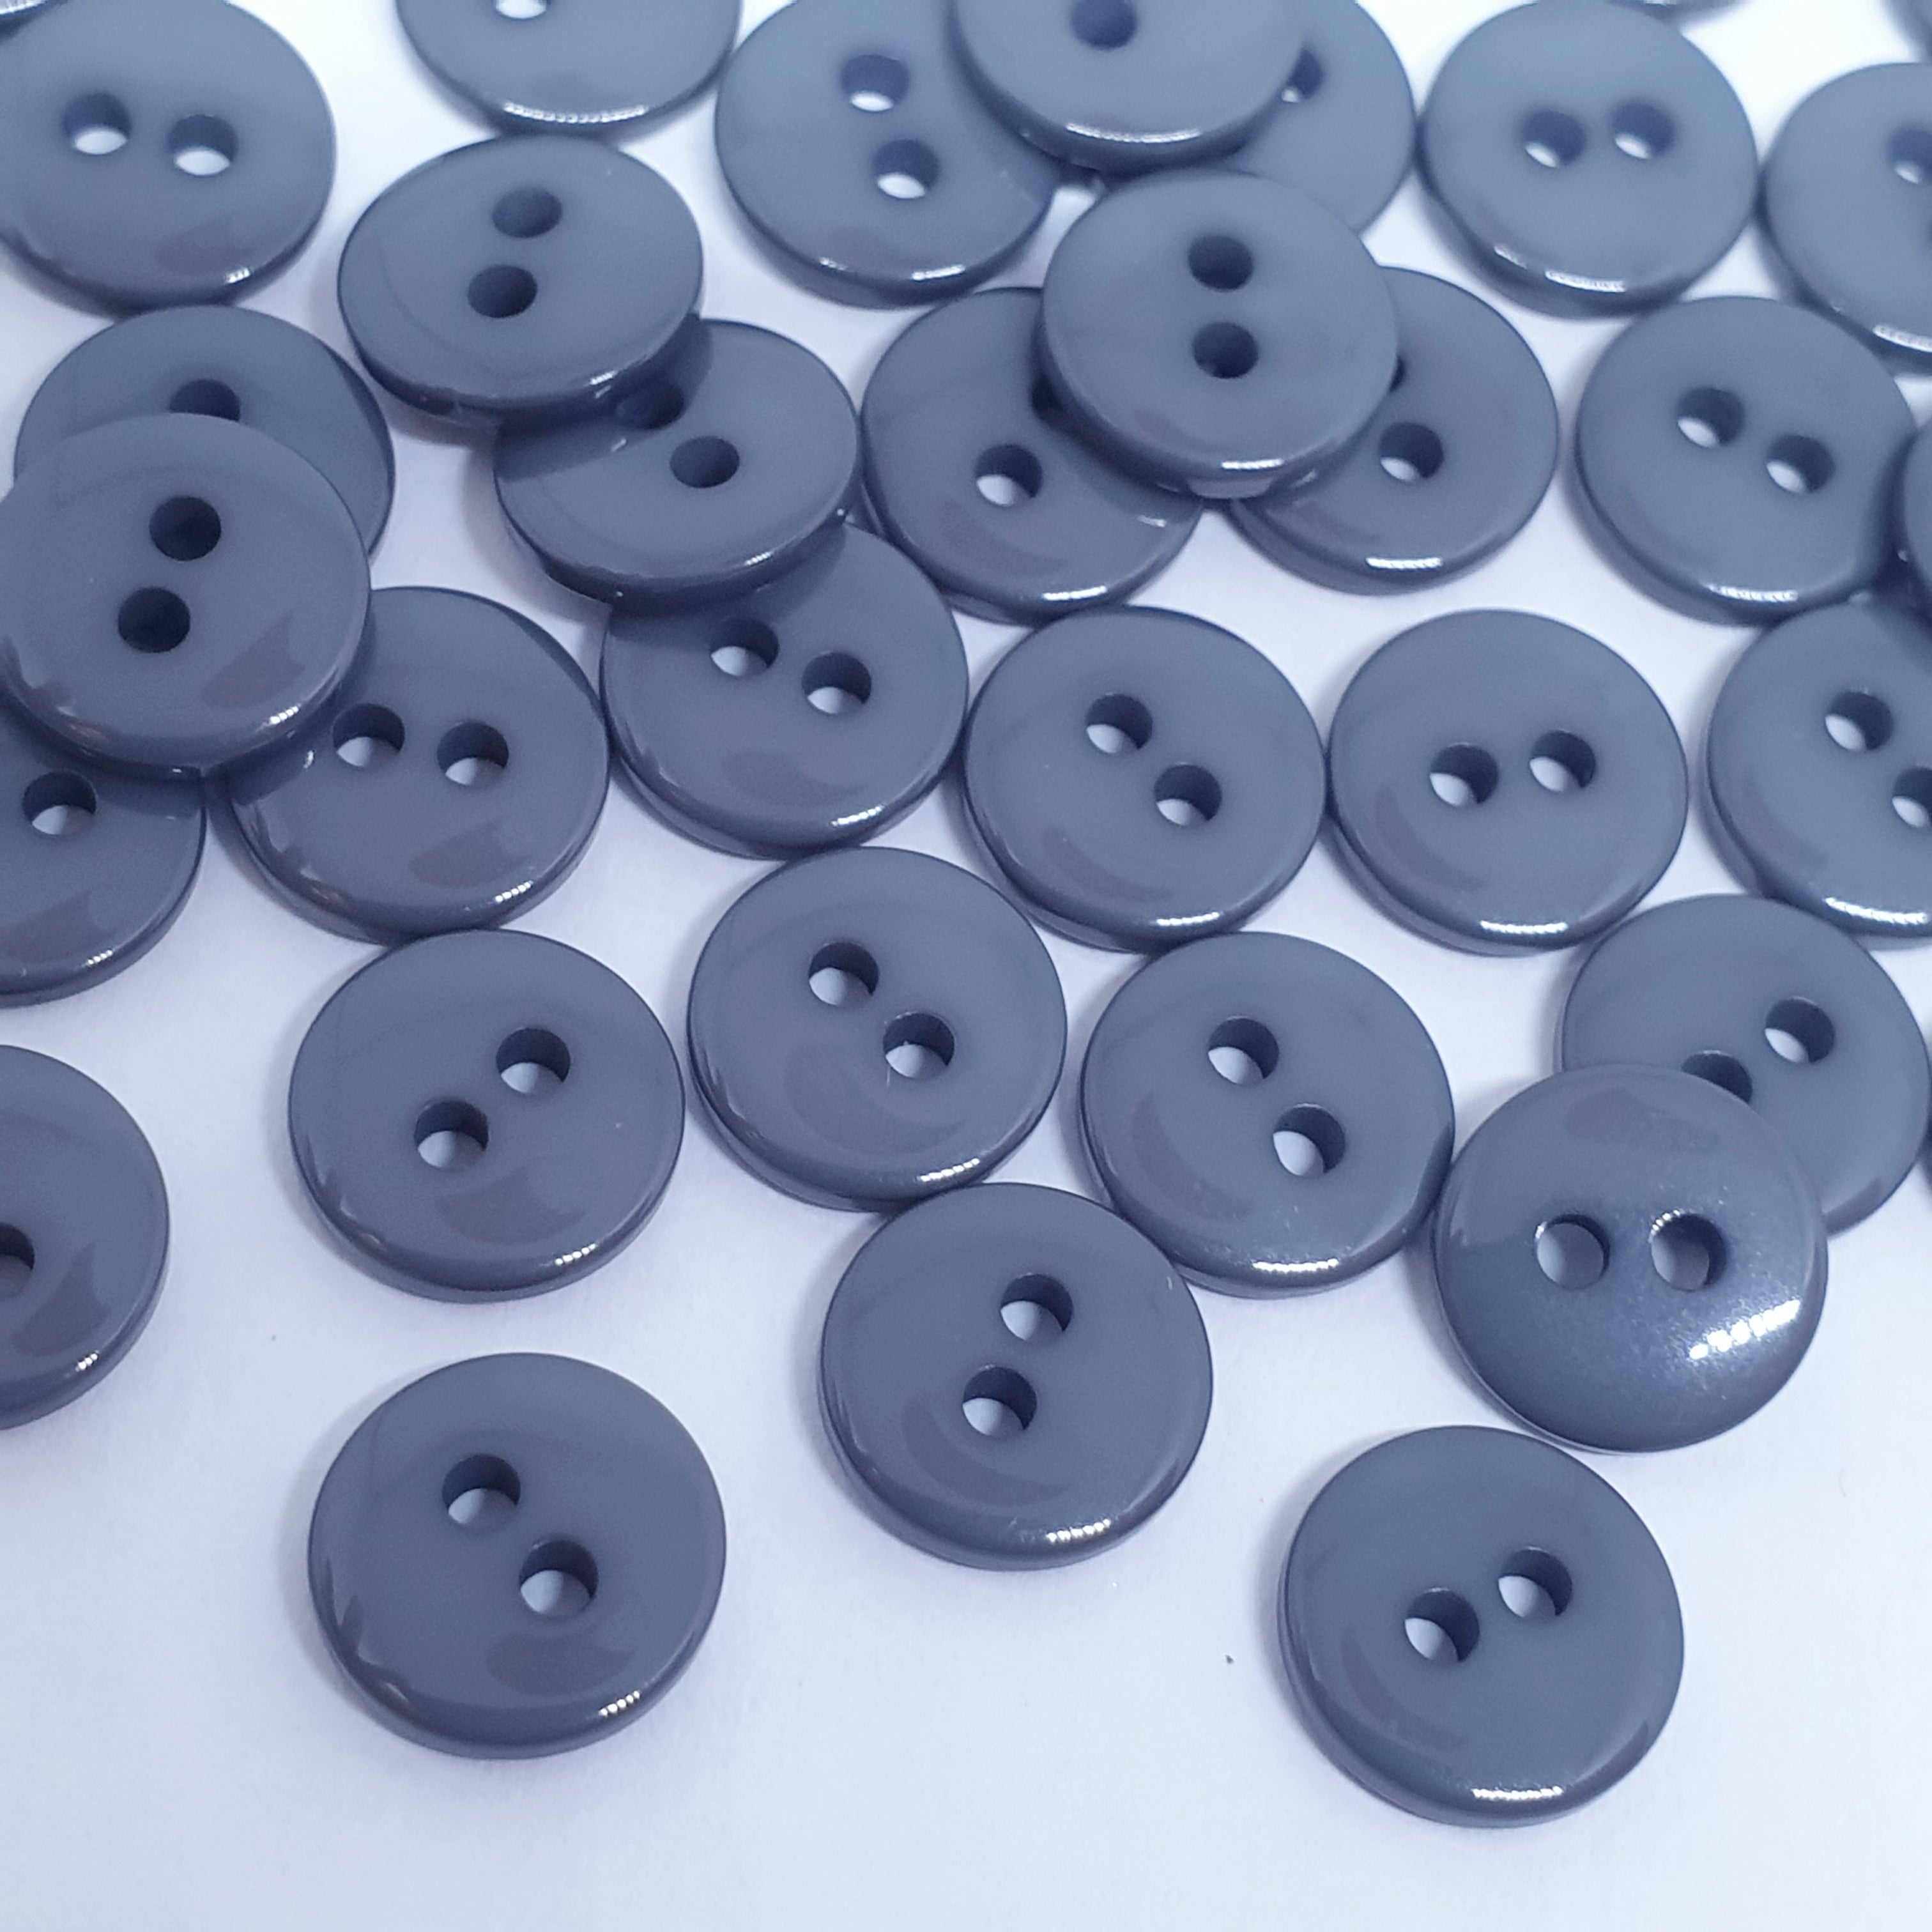 MajorCrafts 120pcs 10mm Dark Grey 2 Holes Small Round Resin Sewing Buttons B24